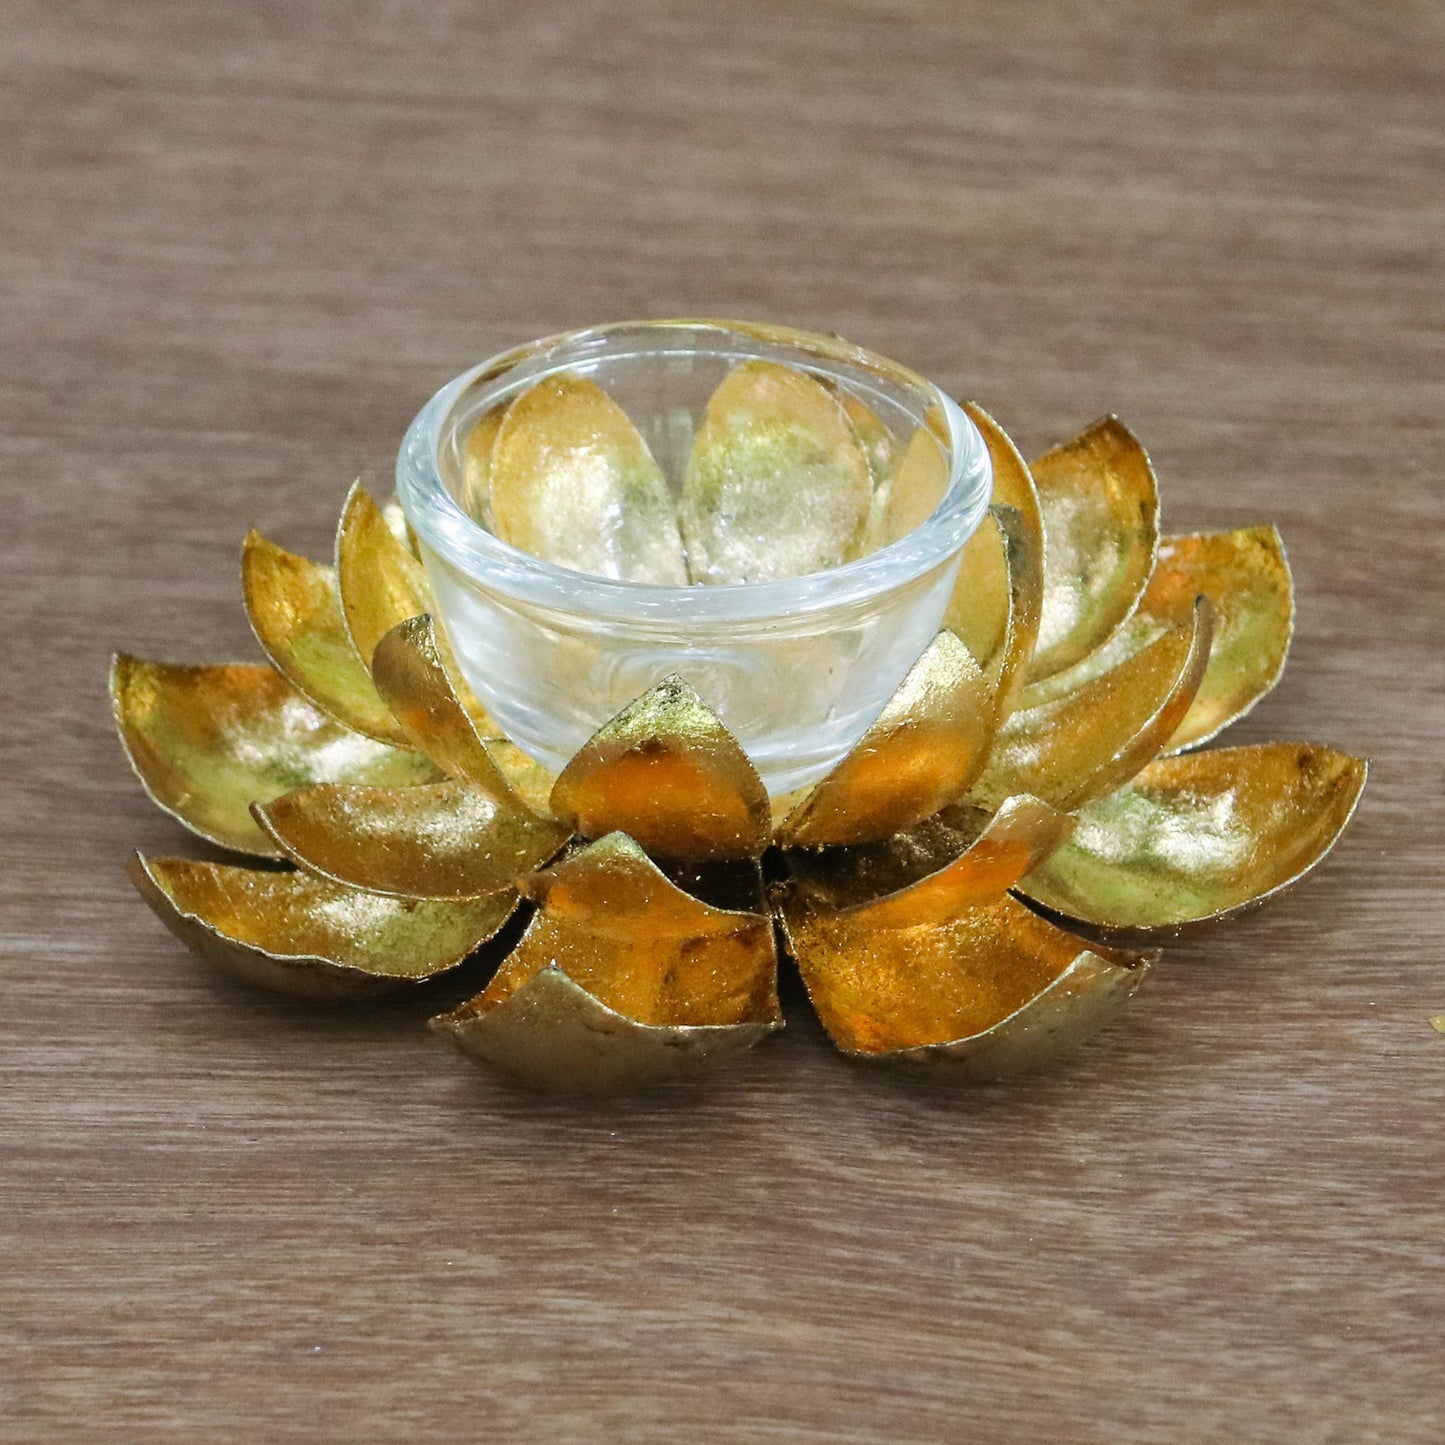 Gleaming Lotus Lotus Shaped Steel Tealight Holder from Thailand